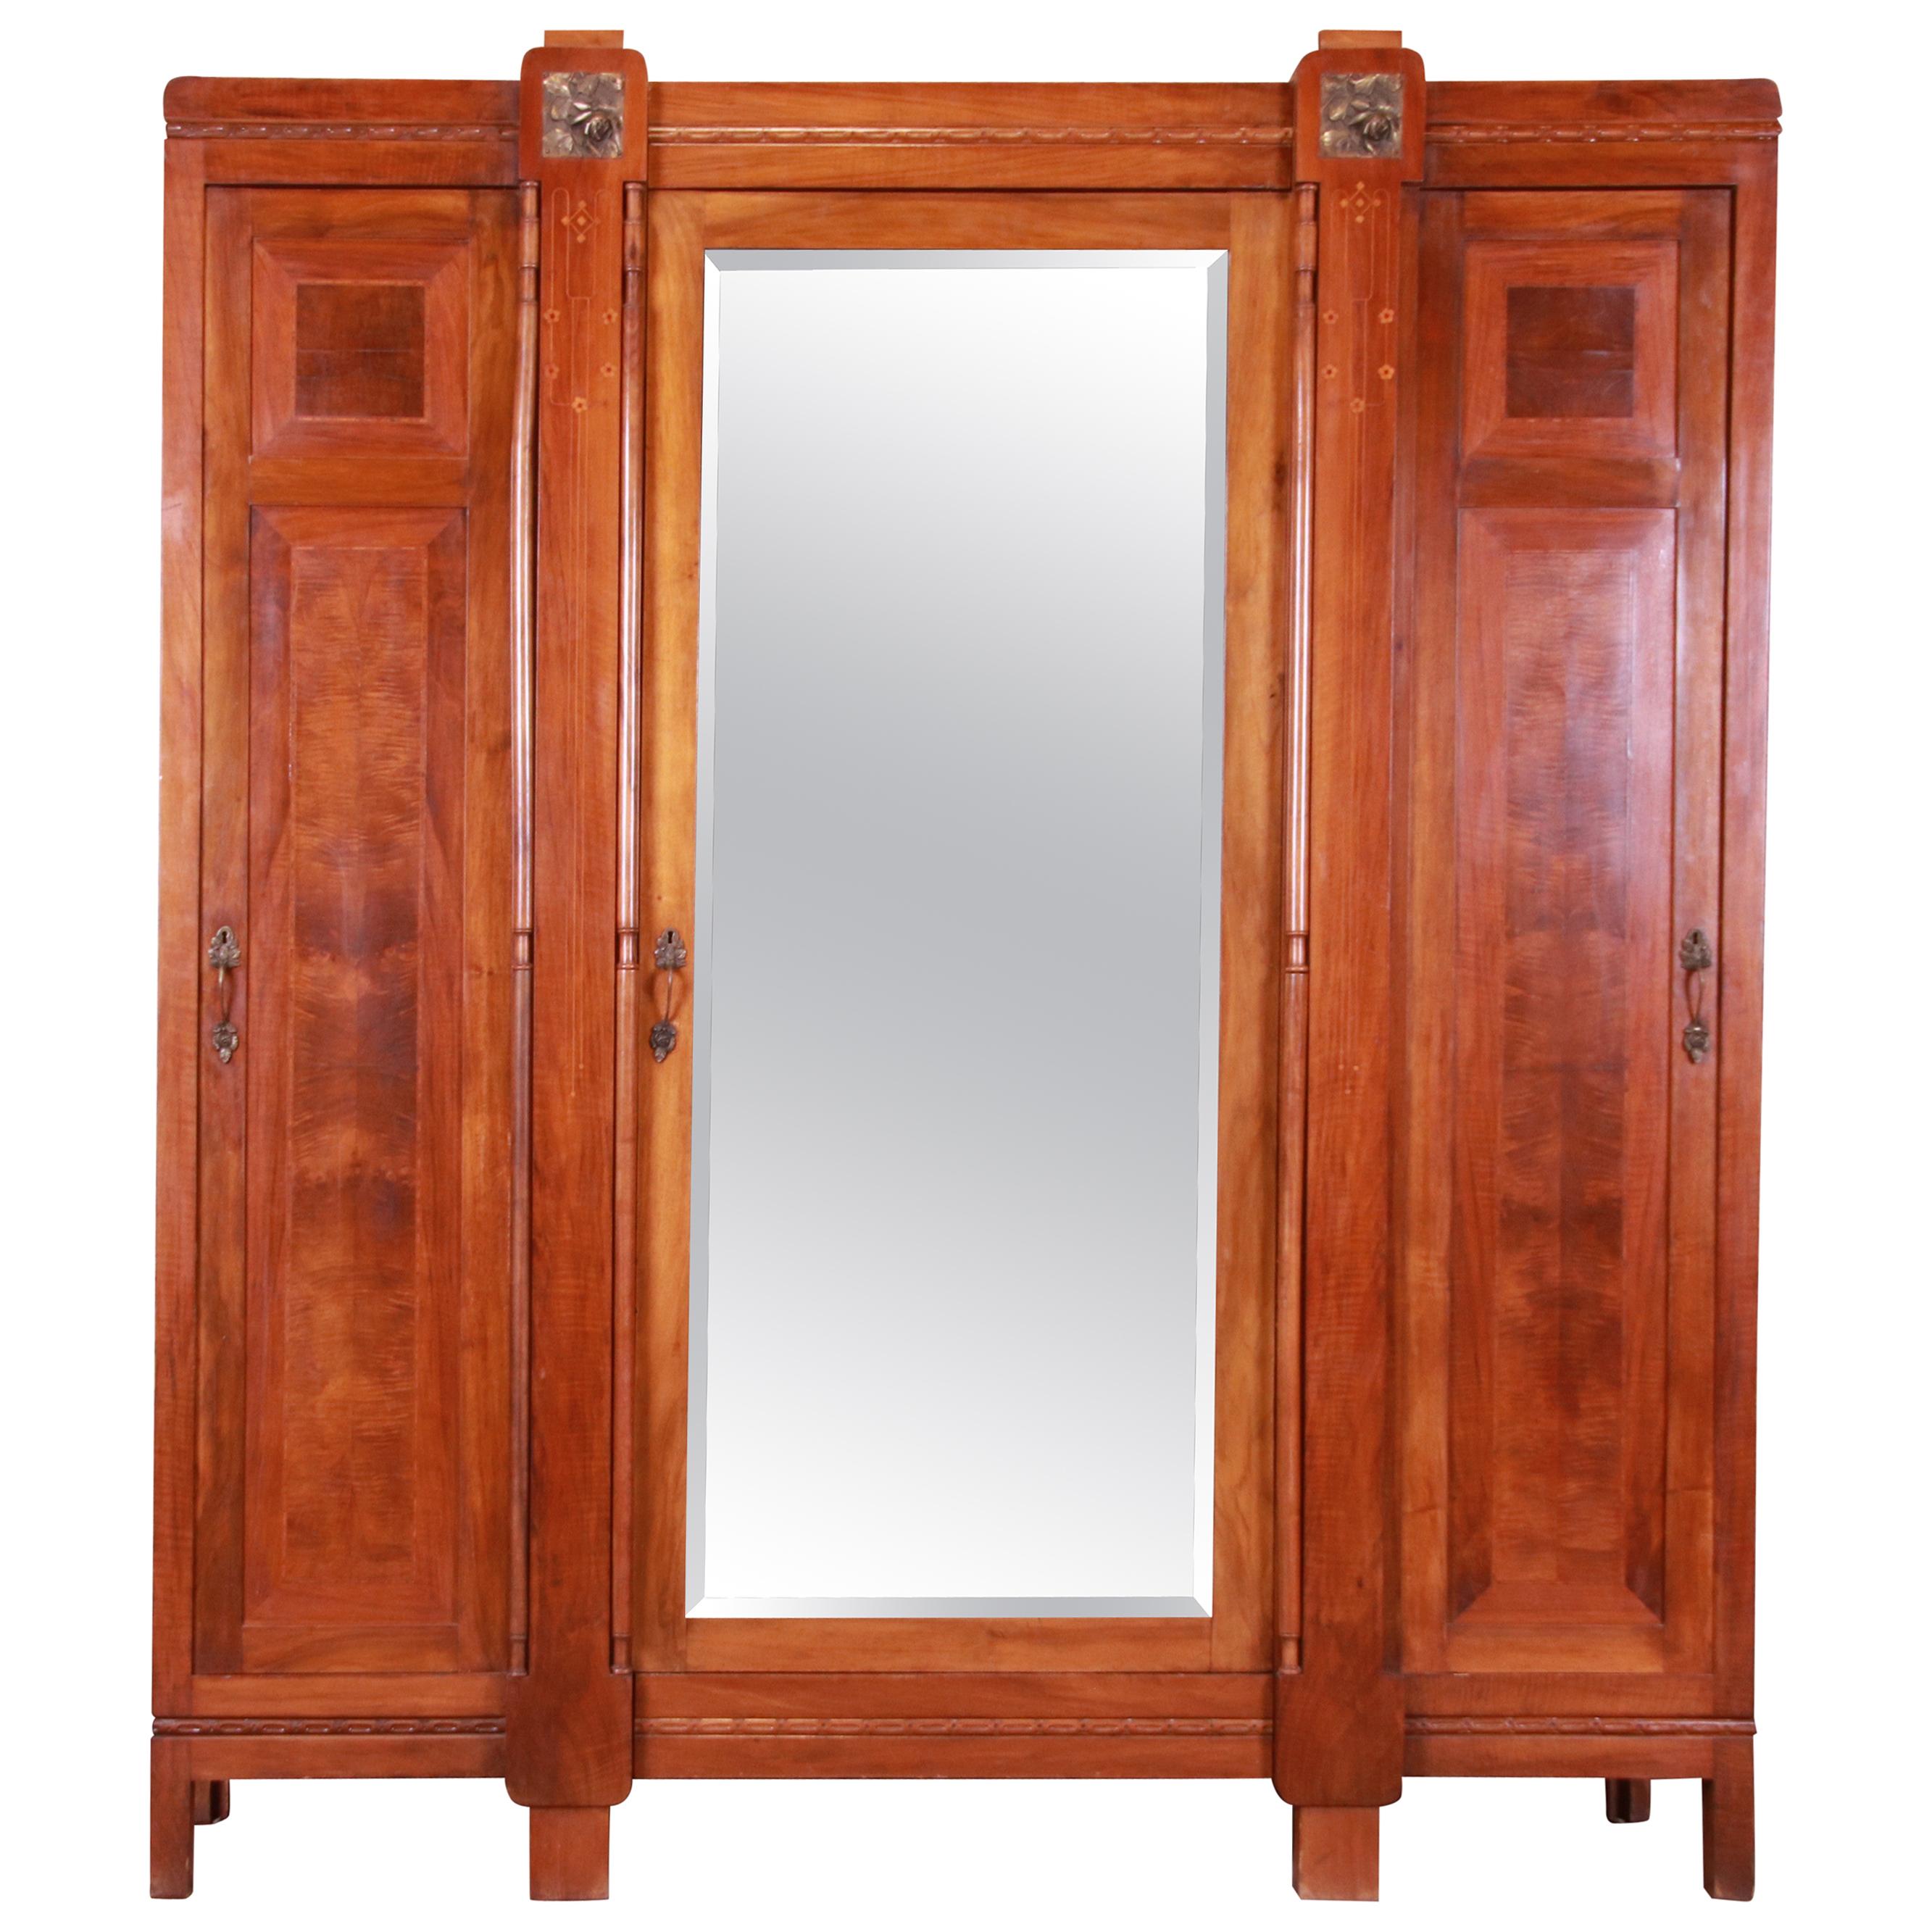 Antique French Art Deco Inlaid Mahogany Mirrored Knockdown Armoire, circa 1920s